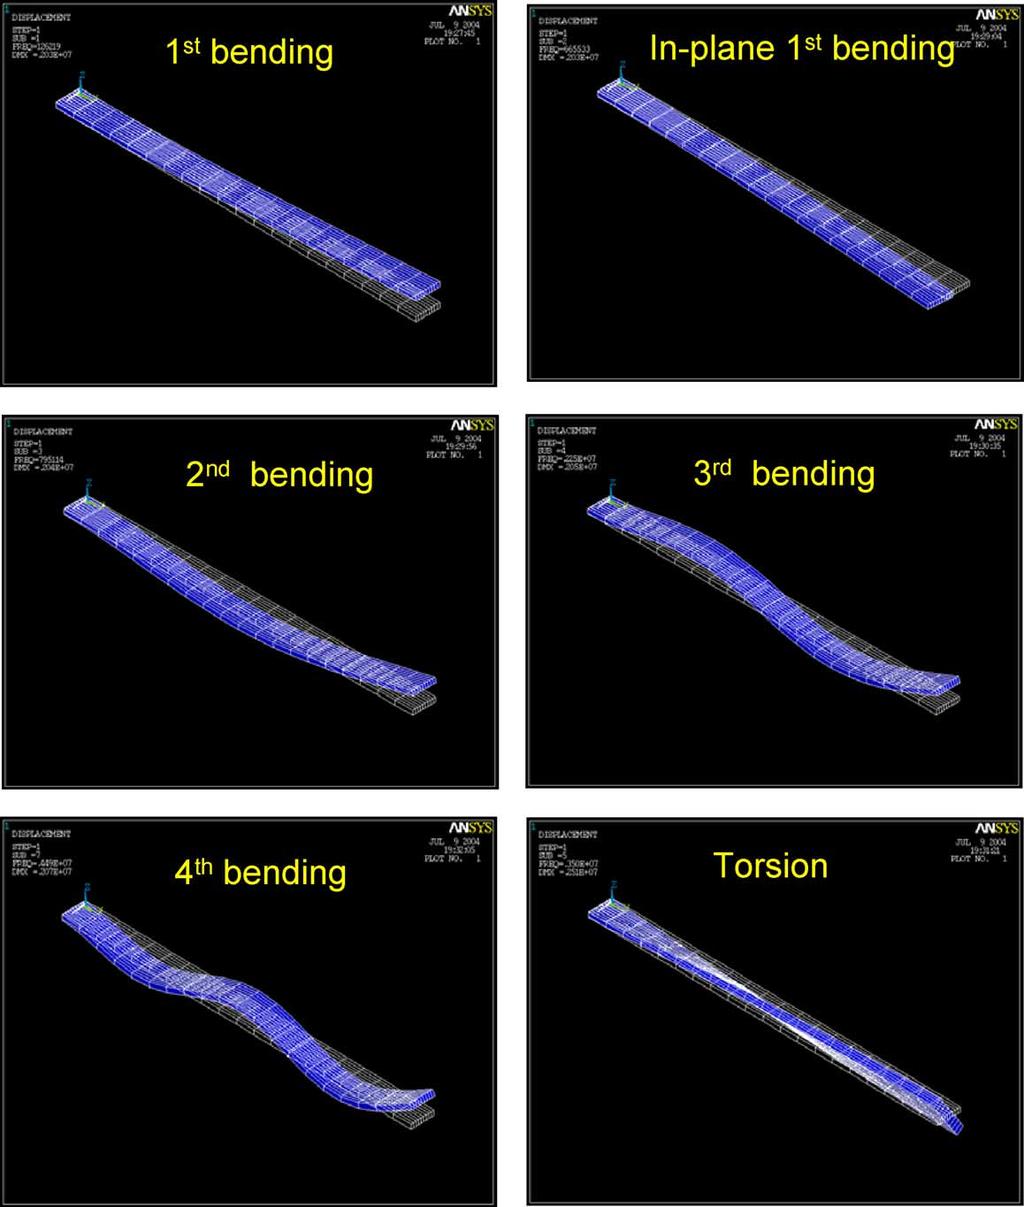 190 W.P. Lai, W. Fang / Sensors and Actuators A 117 (2005) 186 193 Fig. 5. The simulated resonant frequencies of the micro cantilever with 1.1 m thick, 5.3 m wide, and 80 m long.